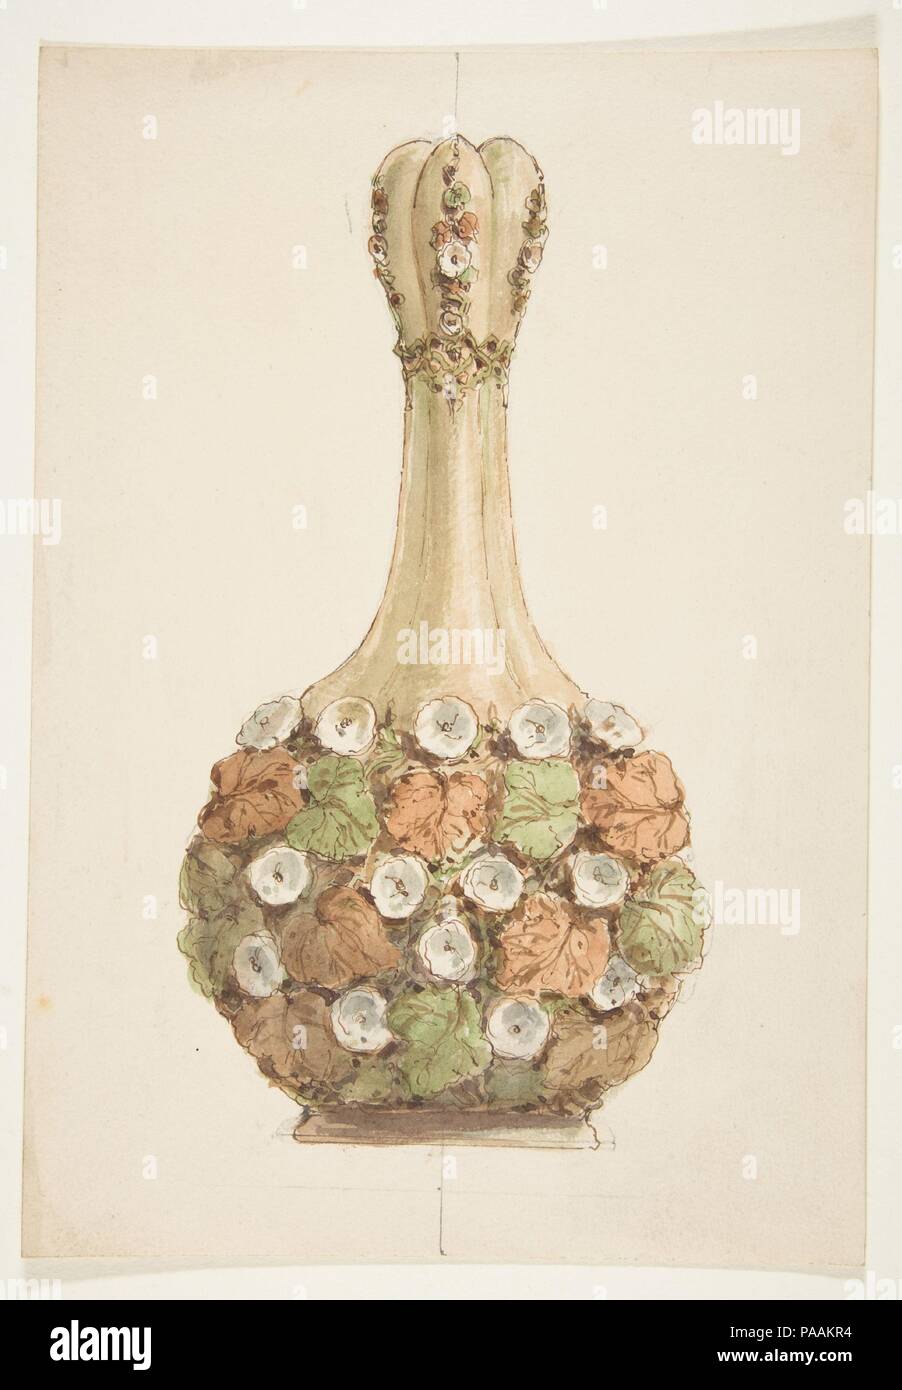 Design for a Carafe. Artist: Anonymous, French, 19th century. Dimensions: sheet: 9 15/16 x 6 7/8 in. (25.2 x 17.5 cm). Date: 19th century. Museum: Metropolitan Museum of Art, New York, USA. Stock Photo